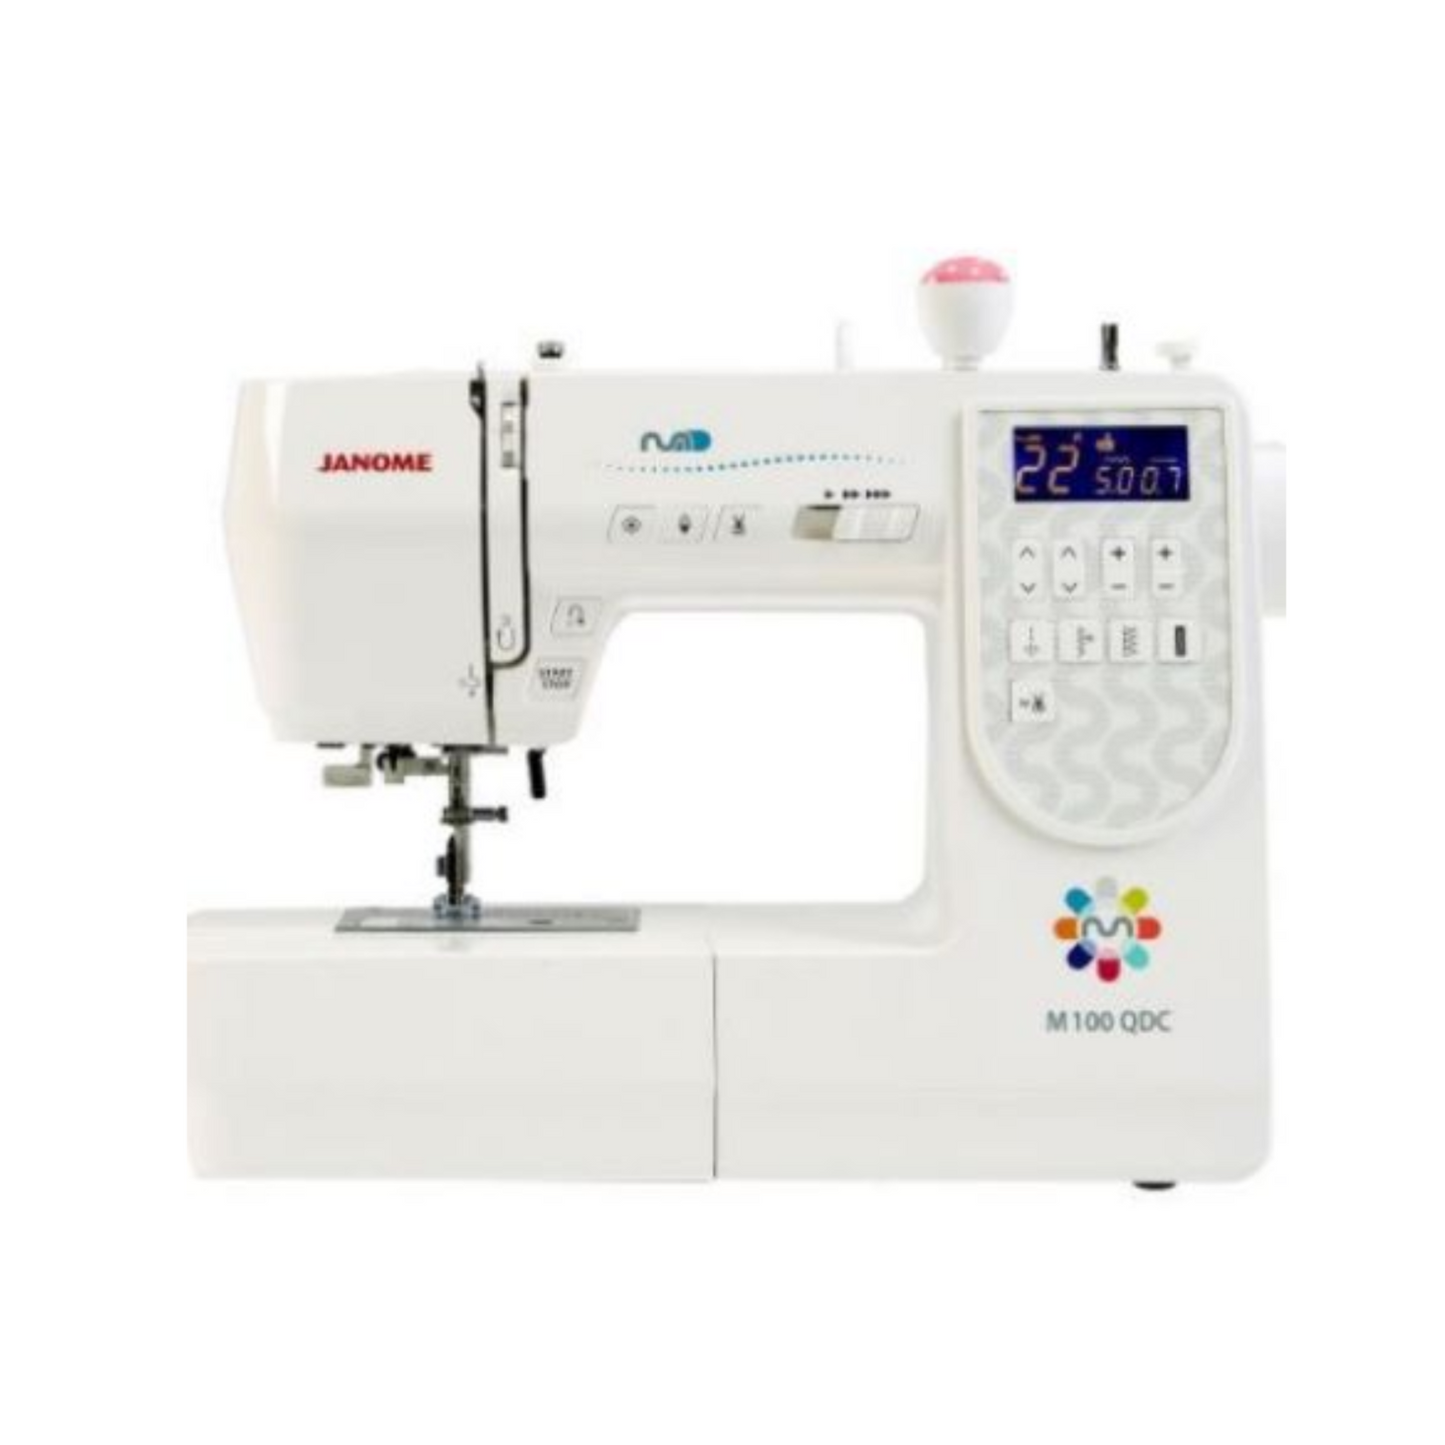 Janome M100QDC - Sewing machine - White - Front view